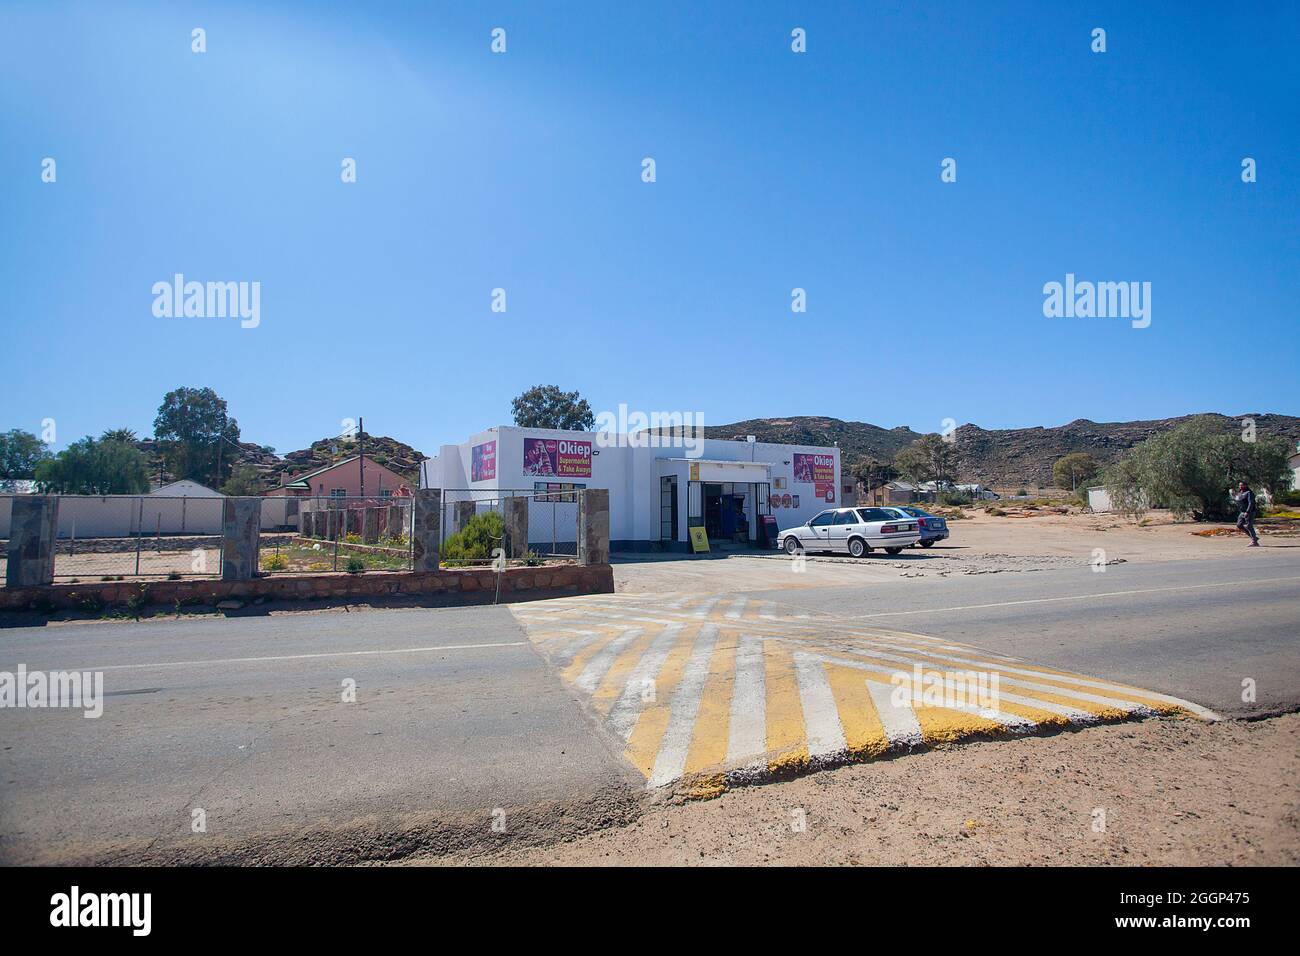 Okiep supermarket and take aways Café. Norther Cape, South Africa Stock Photo